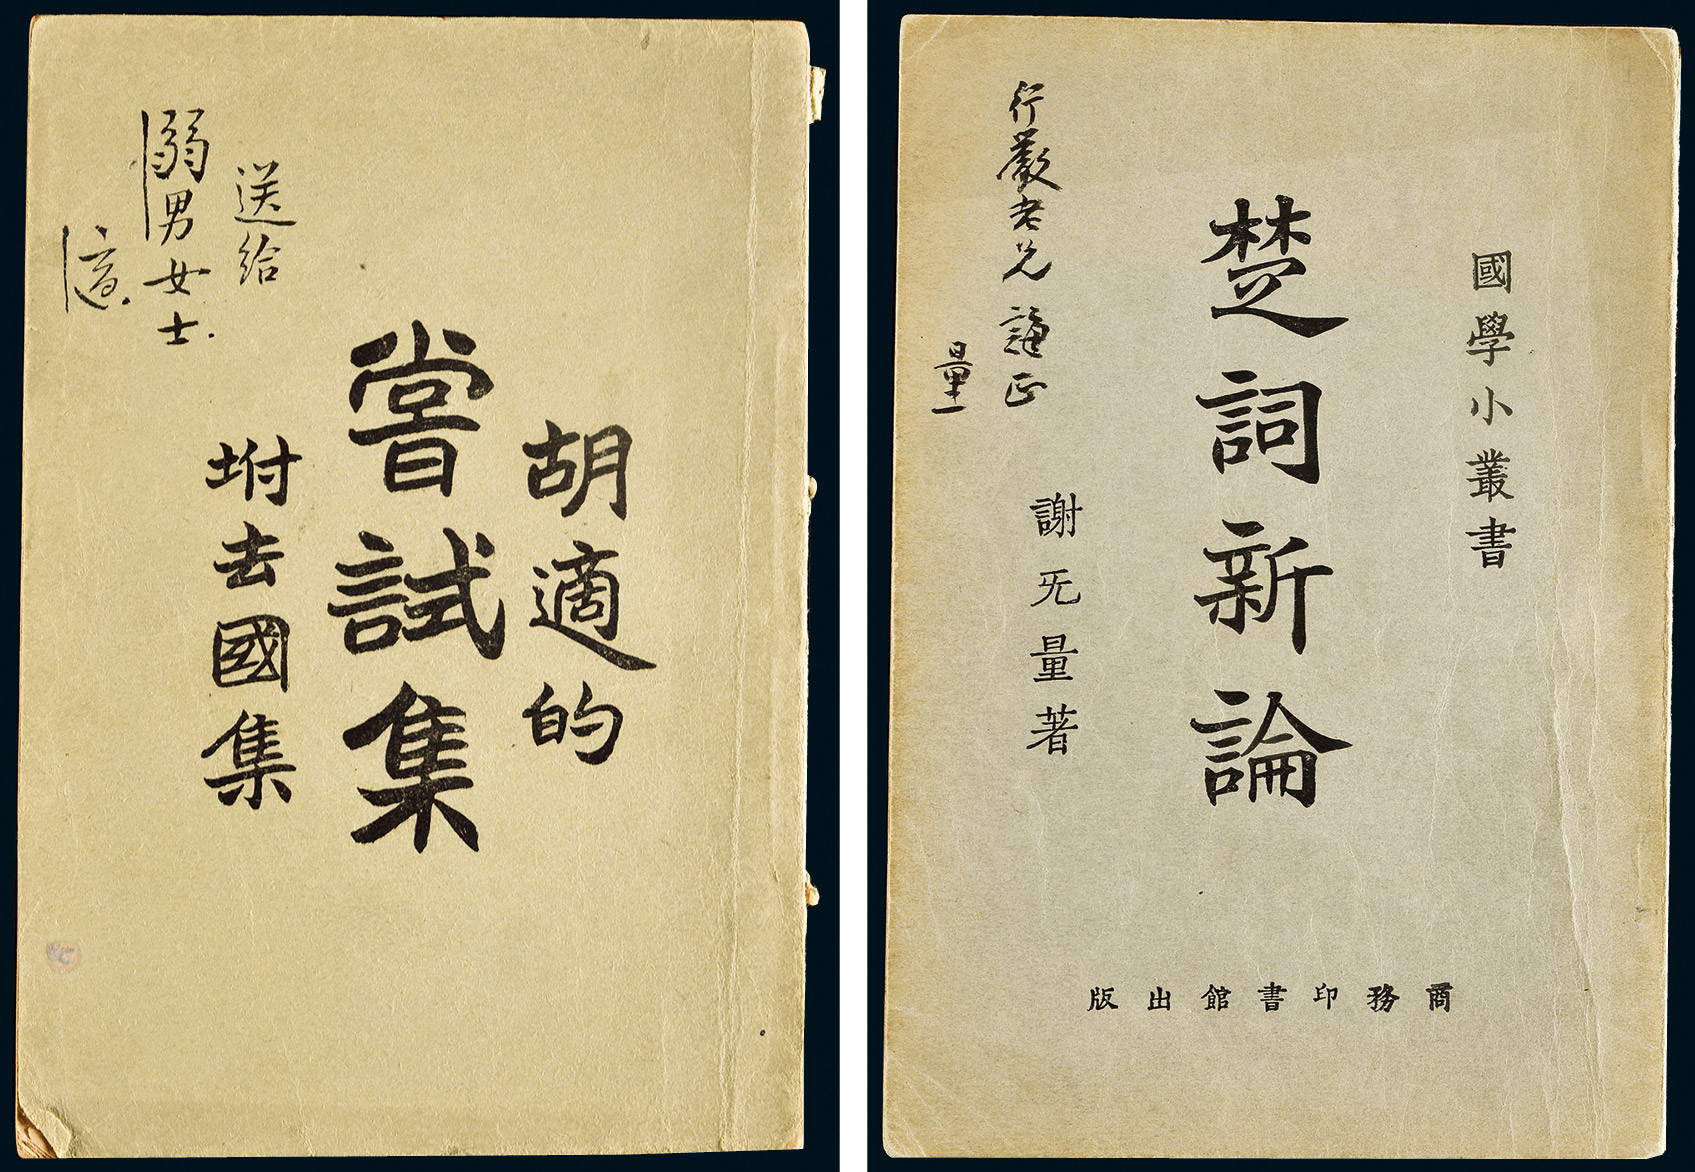 Two autographed booklets to Chang Shih-chao，Wu Juo-nan couple by Hu Shih and Hsie Wu-liang